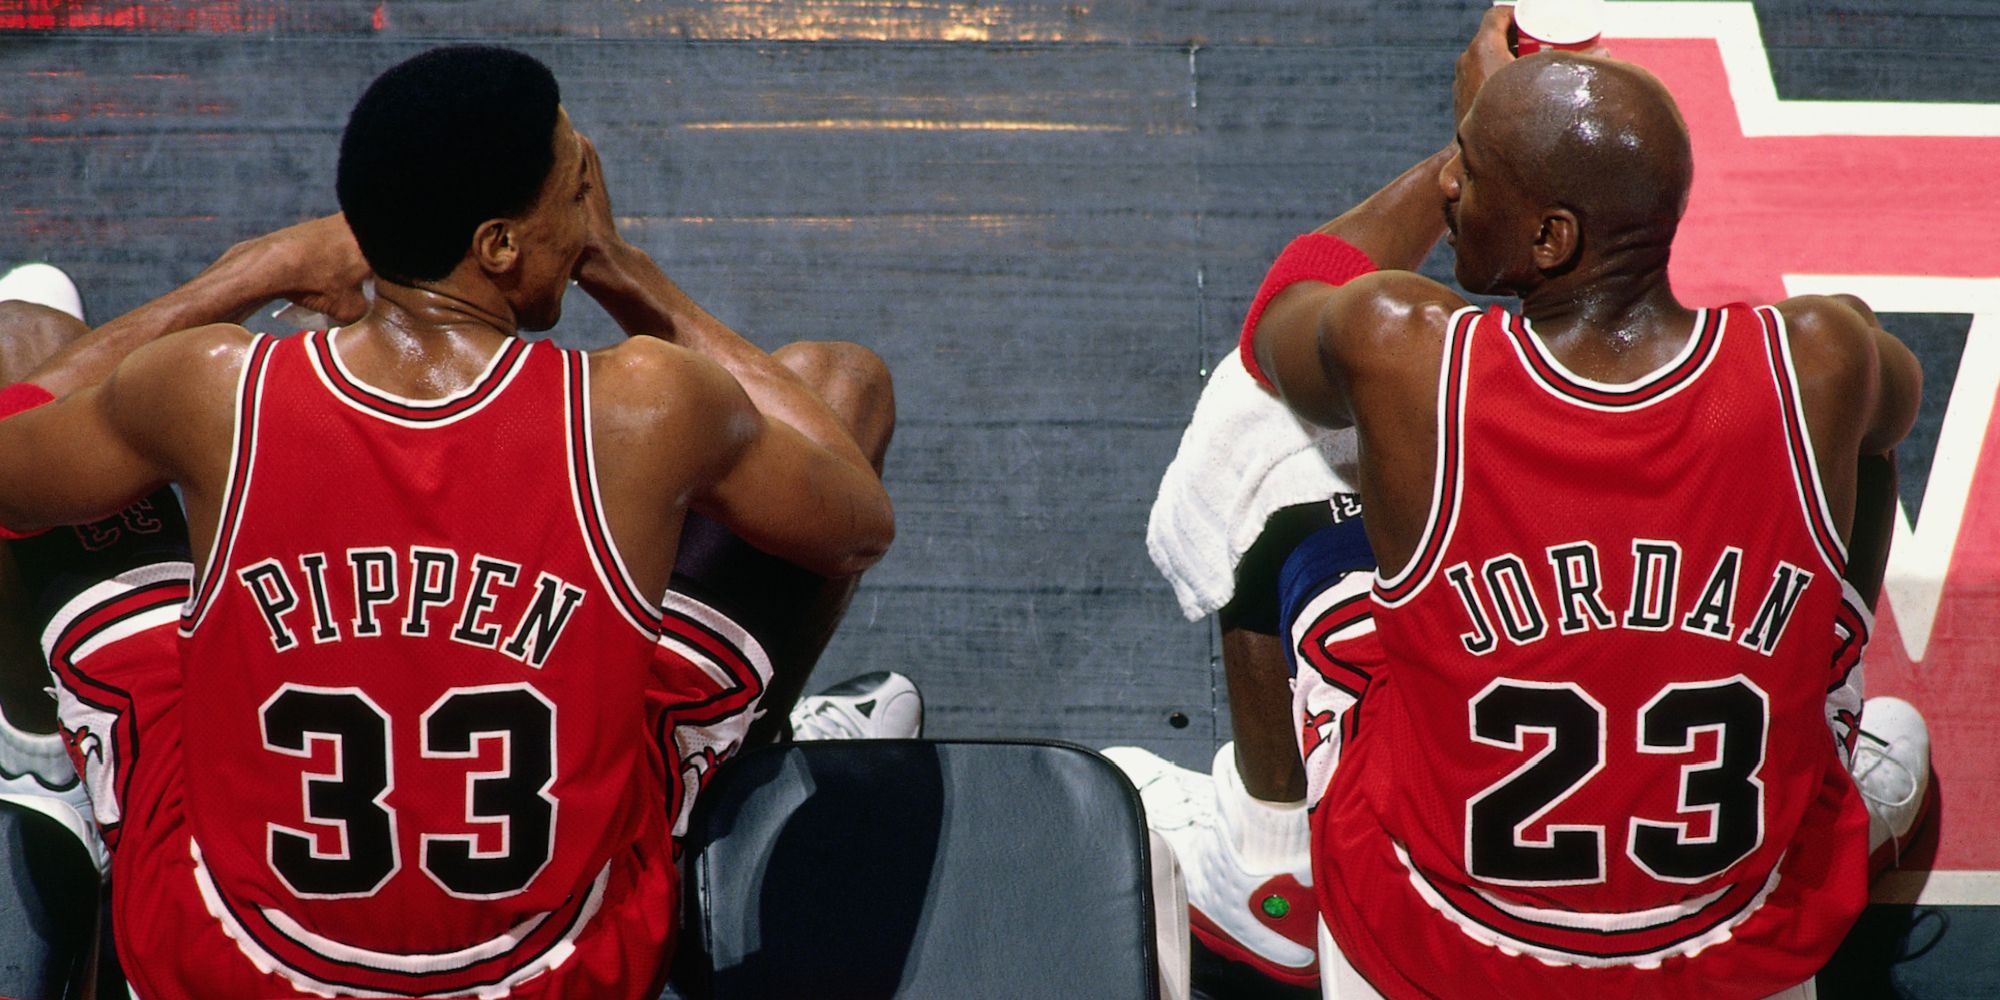 Michael Jordan and Scottie Pippen look at one another while sitting down.